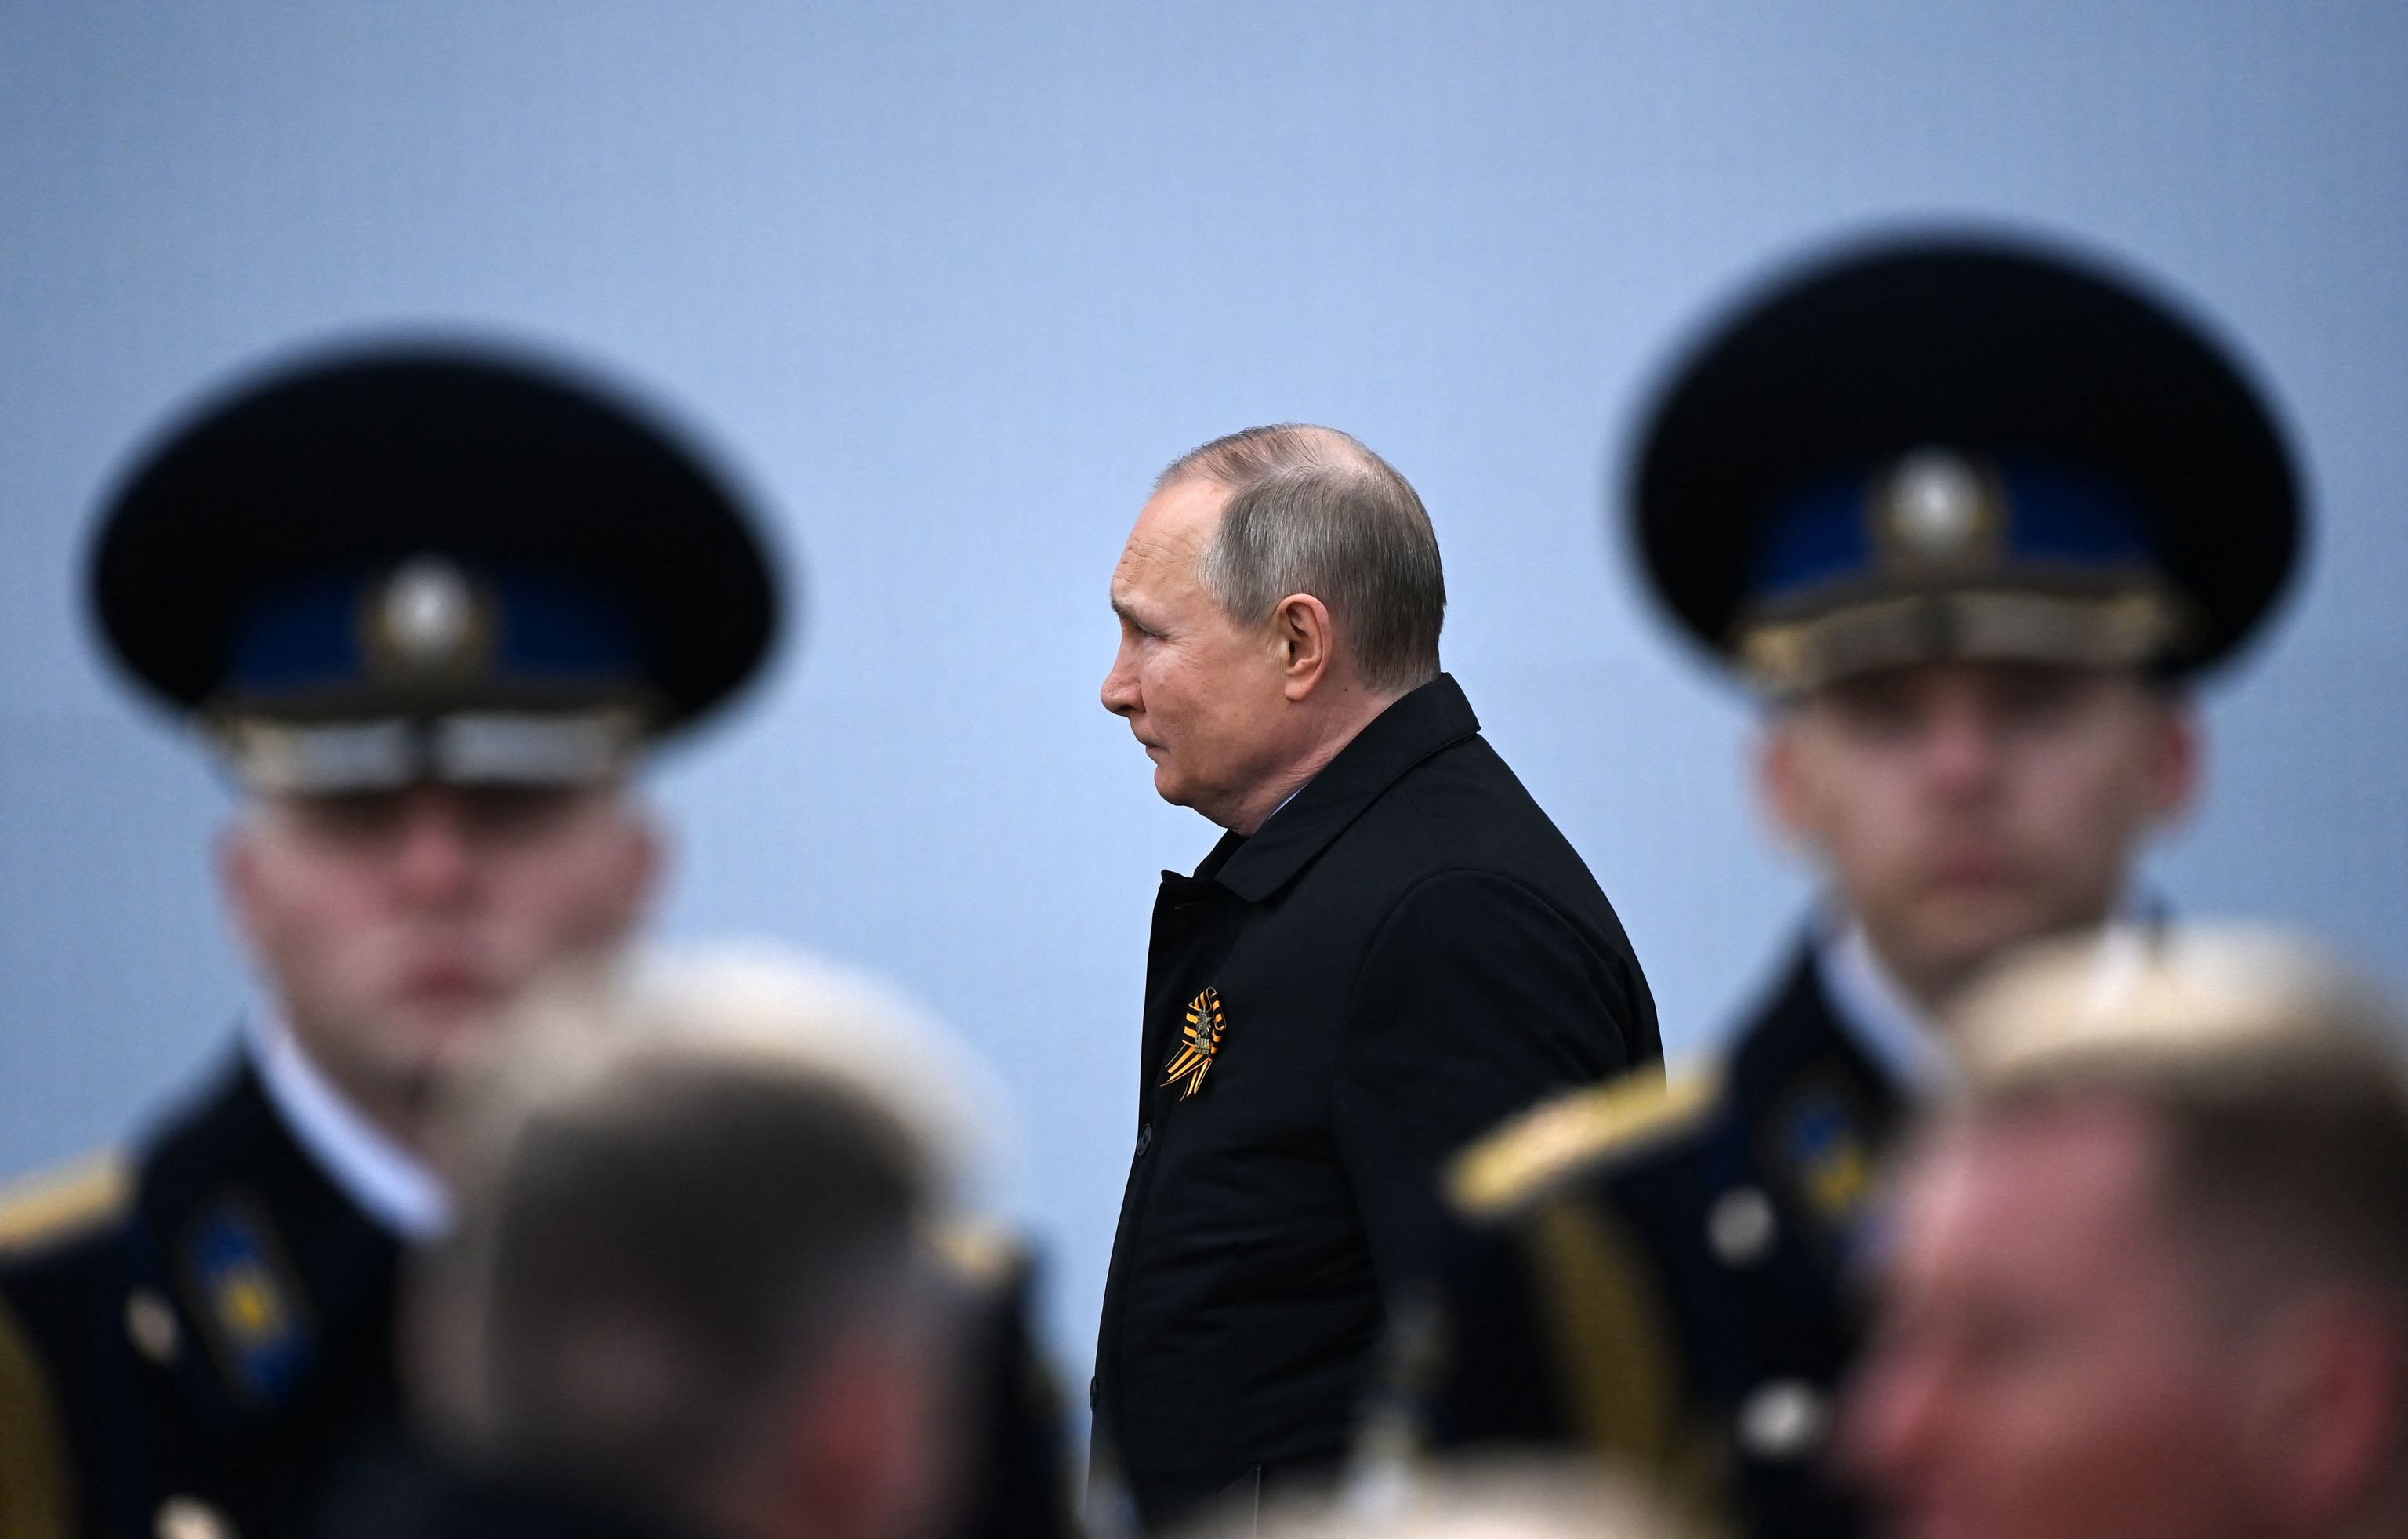 Russian President Vladimir Putin shortly before speaking in Red Square.